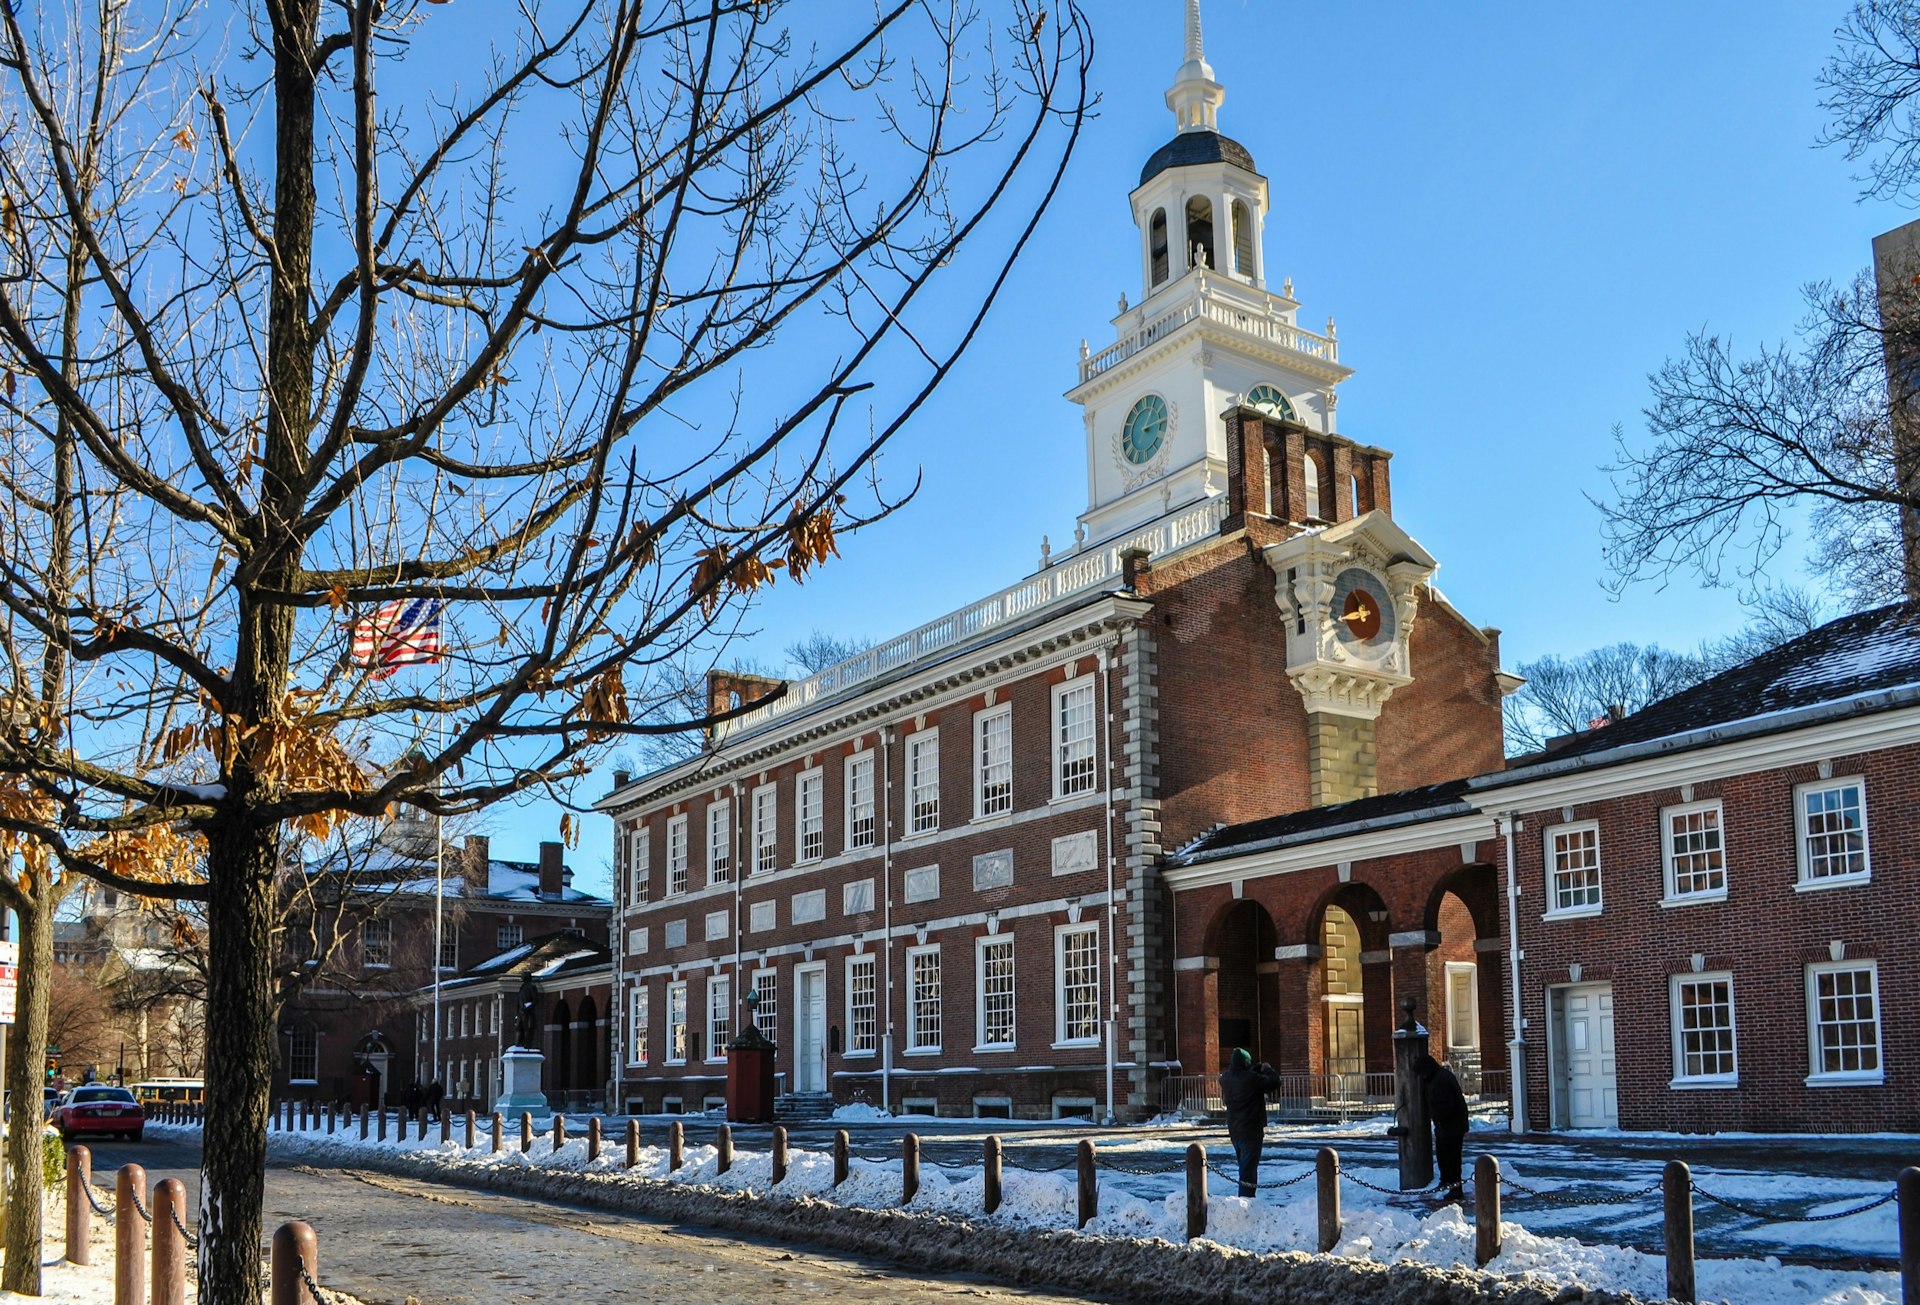 Snow blankets the ground around leafless trees at Independence Hall in Philadelphia